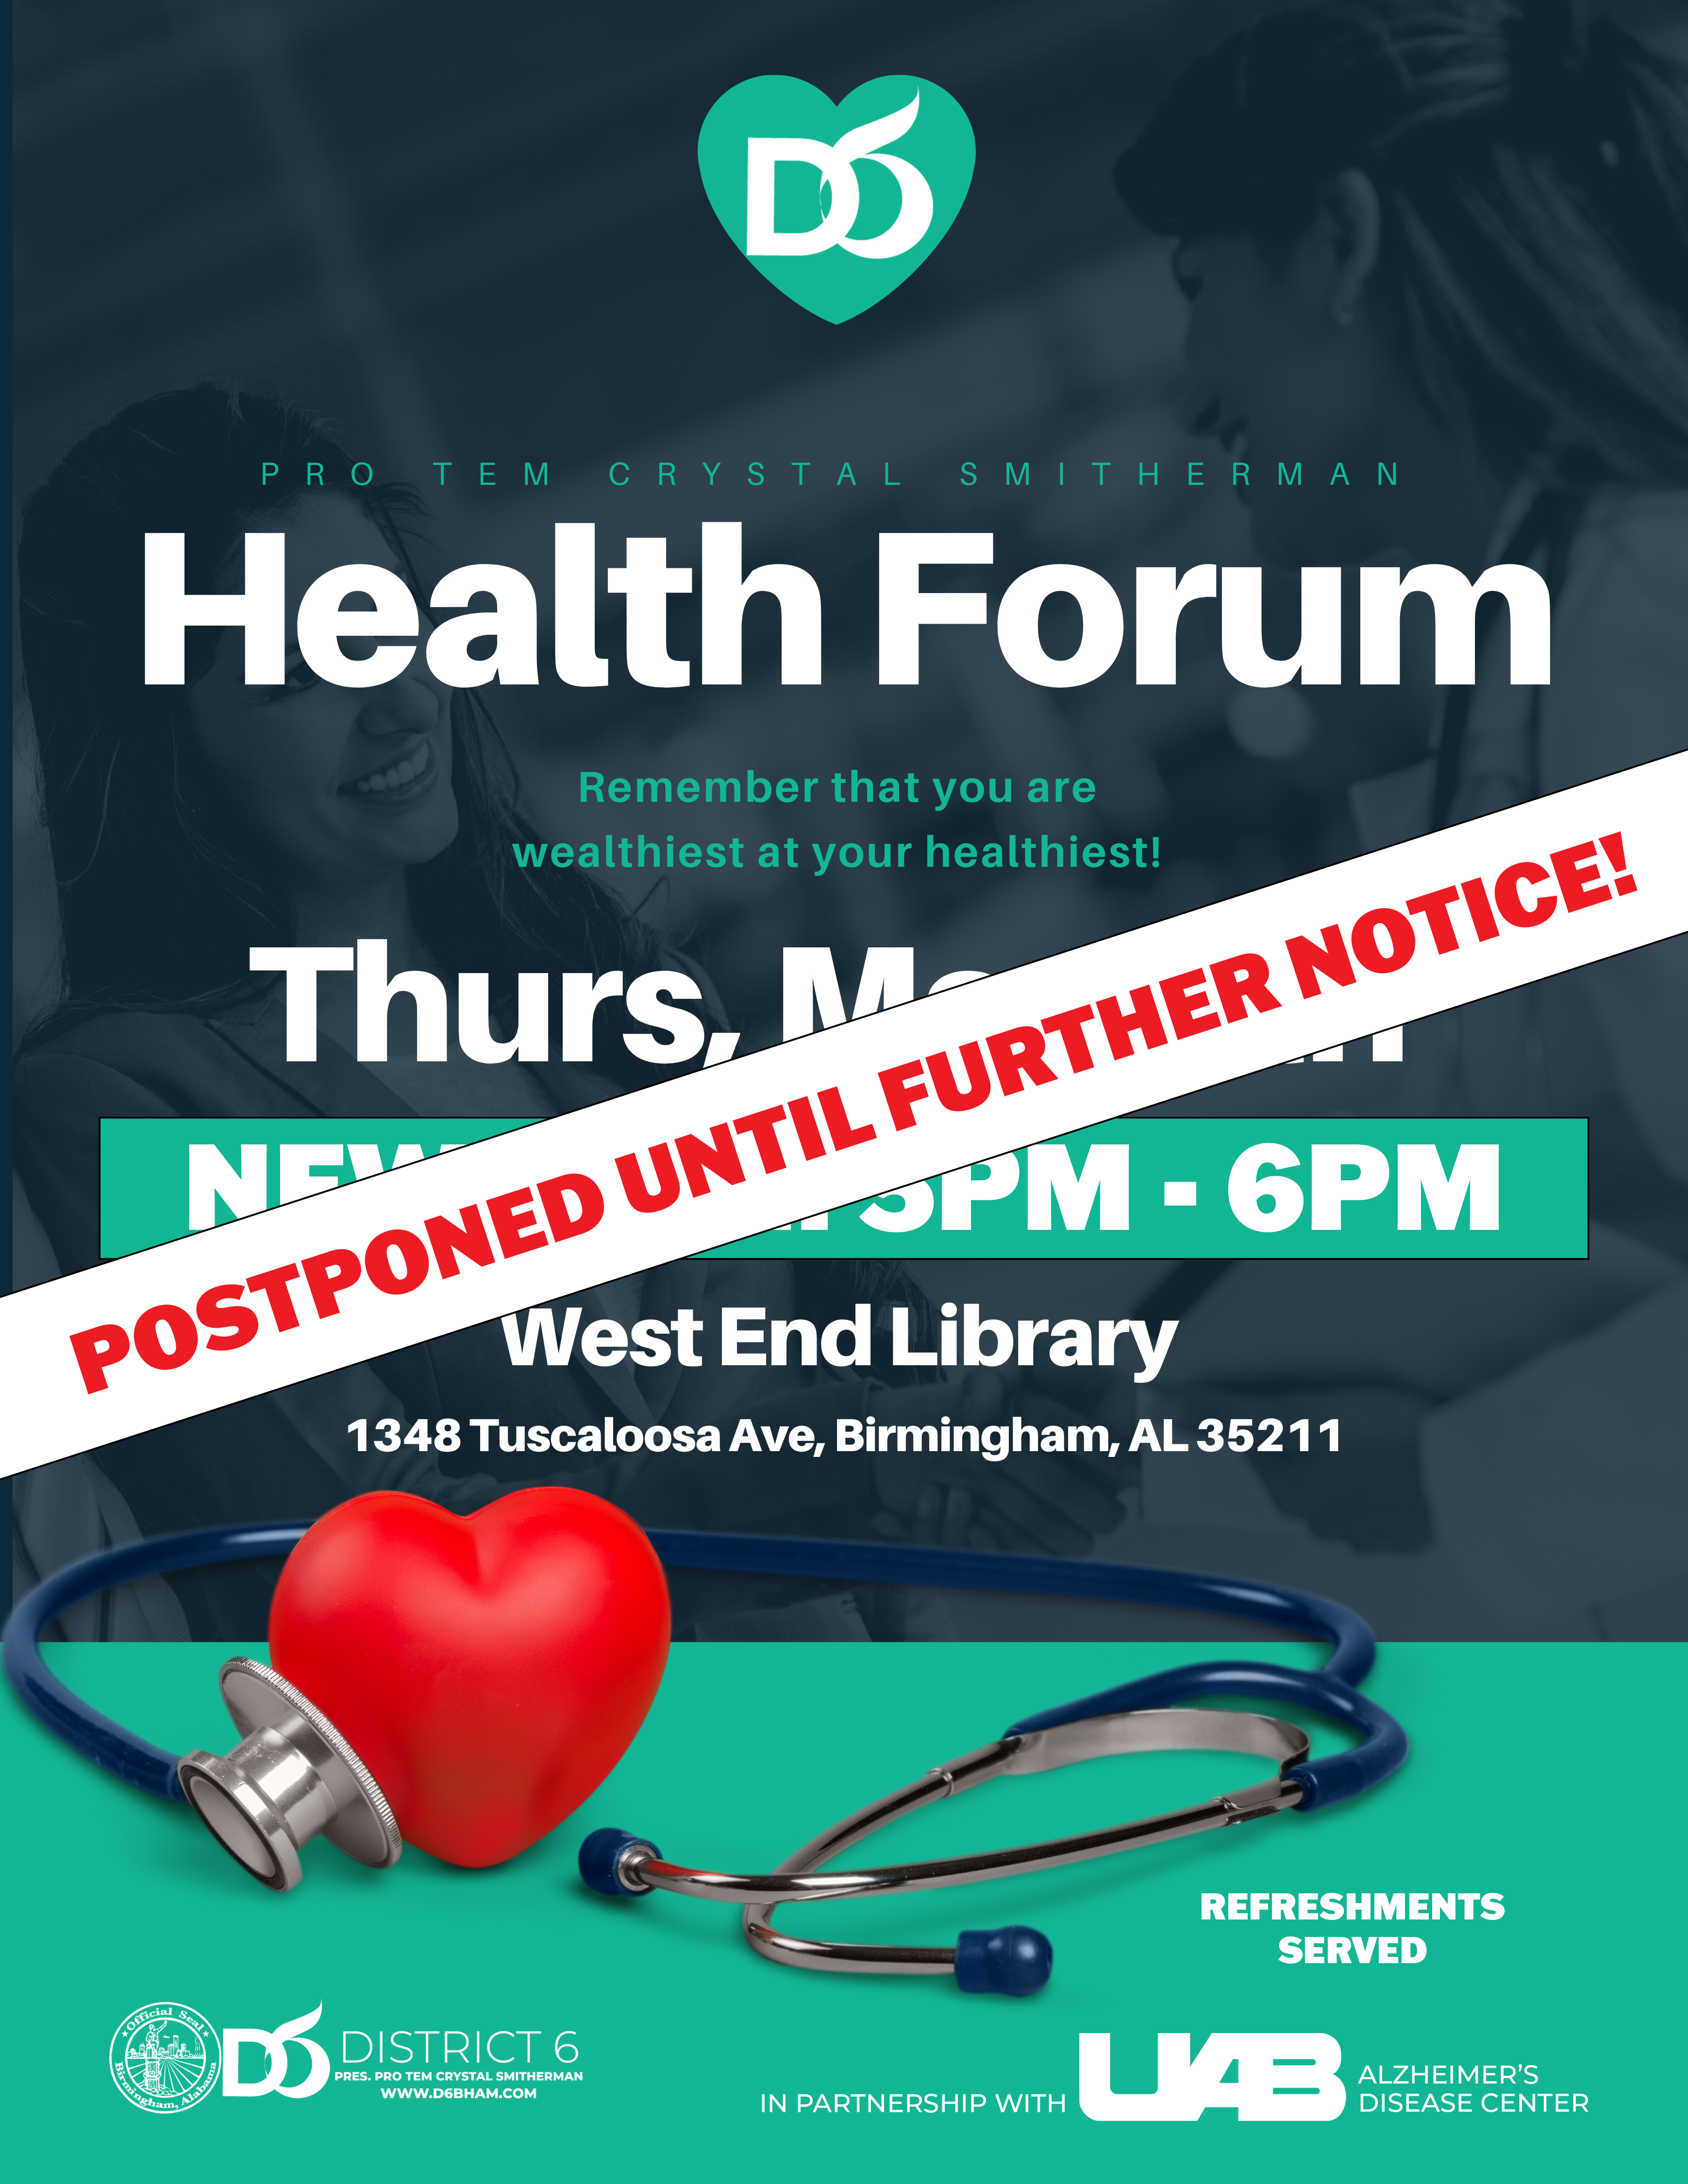 POSTPONED UNTIL FURTHER NOTICE! D6 Health Forum at West End Library May 4th